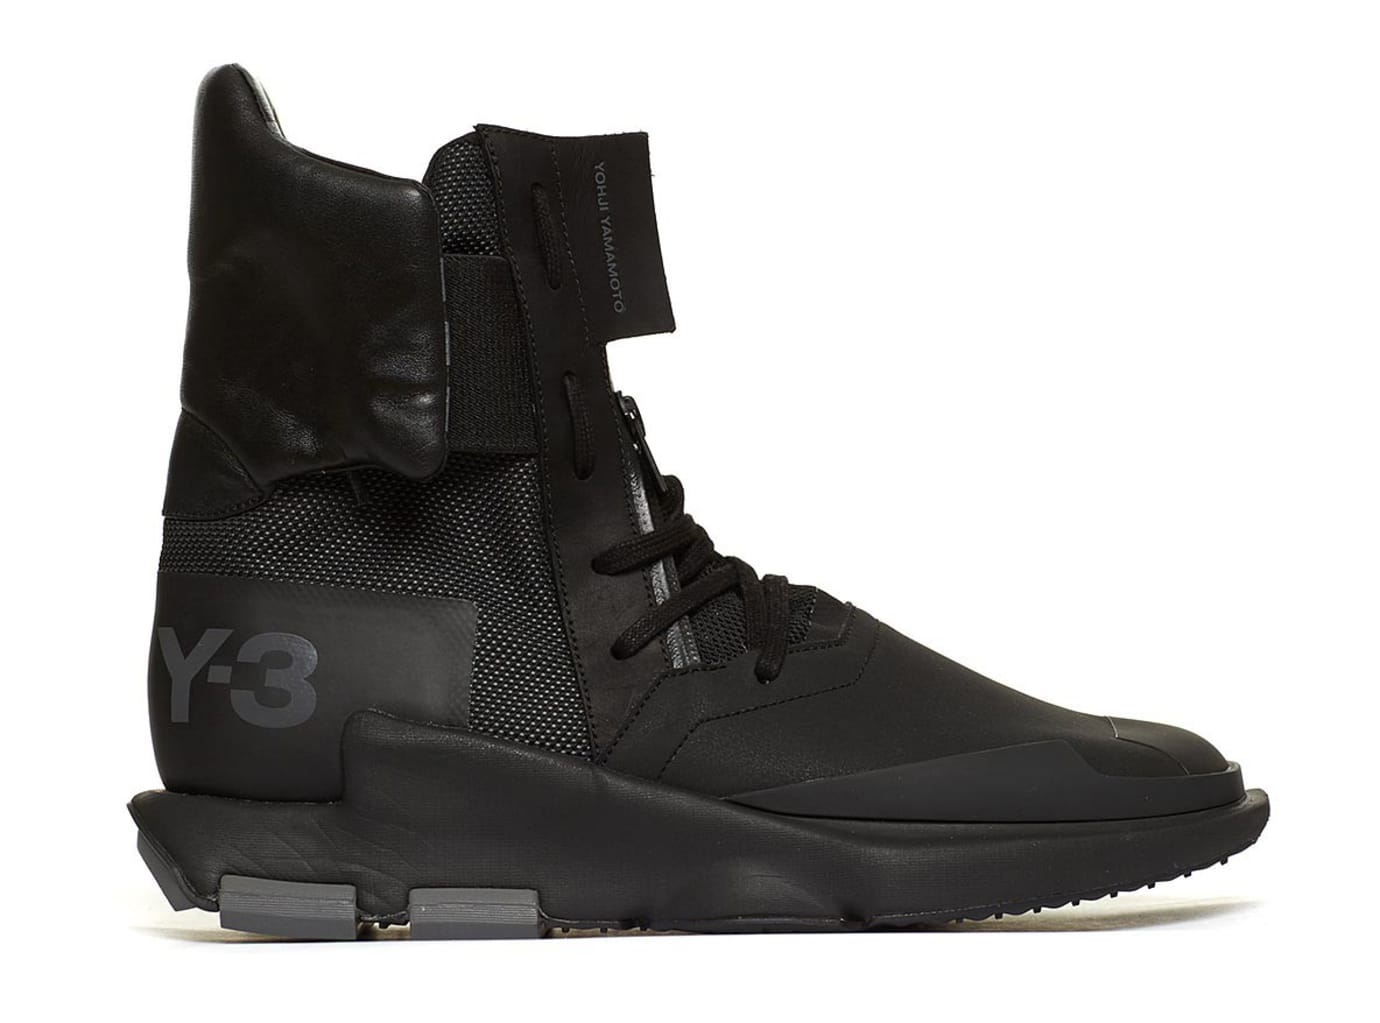 Adidas Y3 Fall Winter 2017 Sneakers | Sole Collector